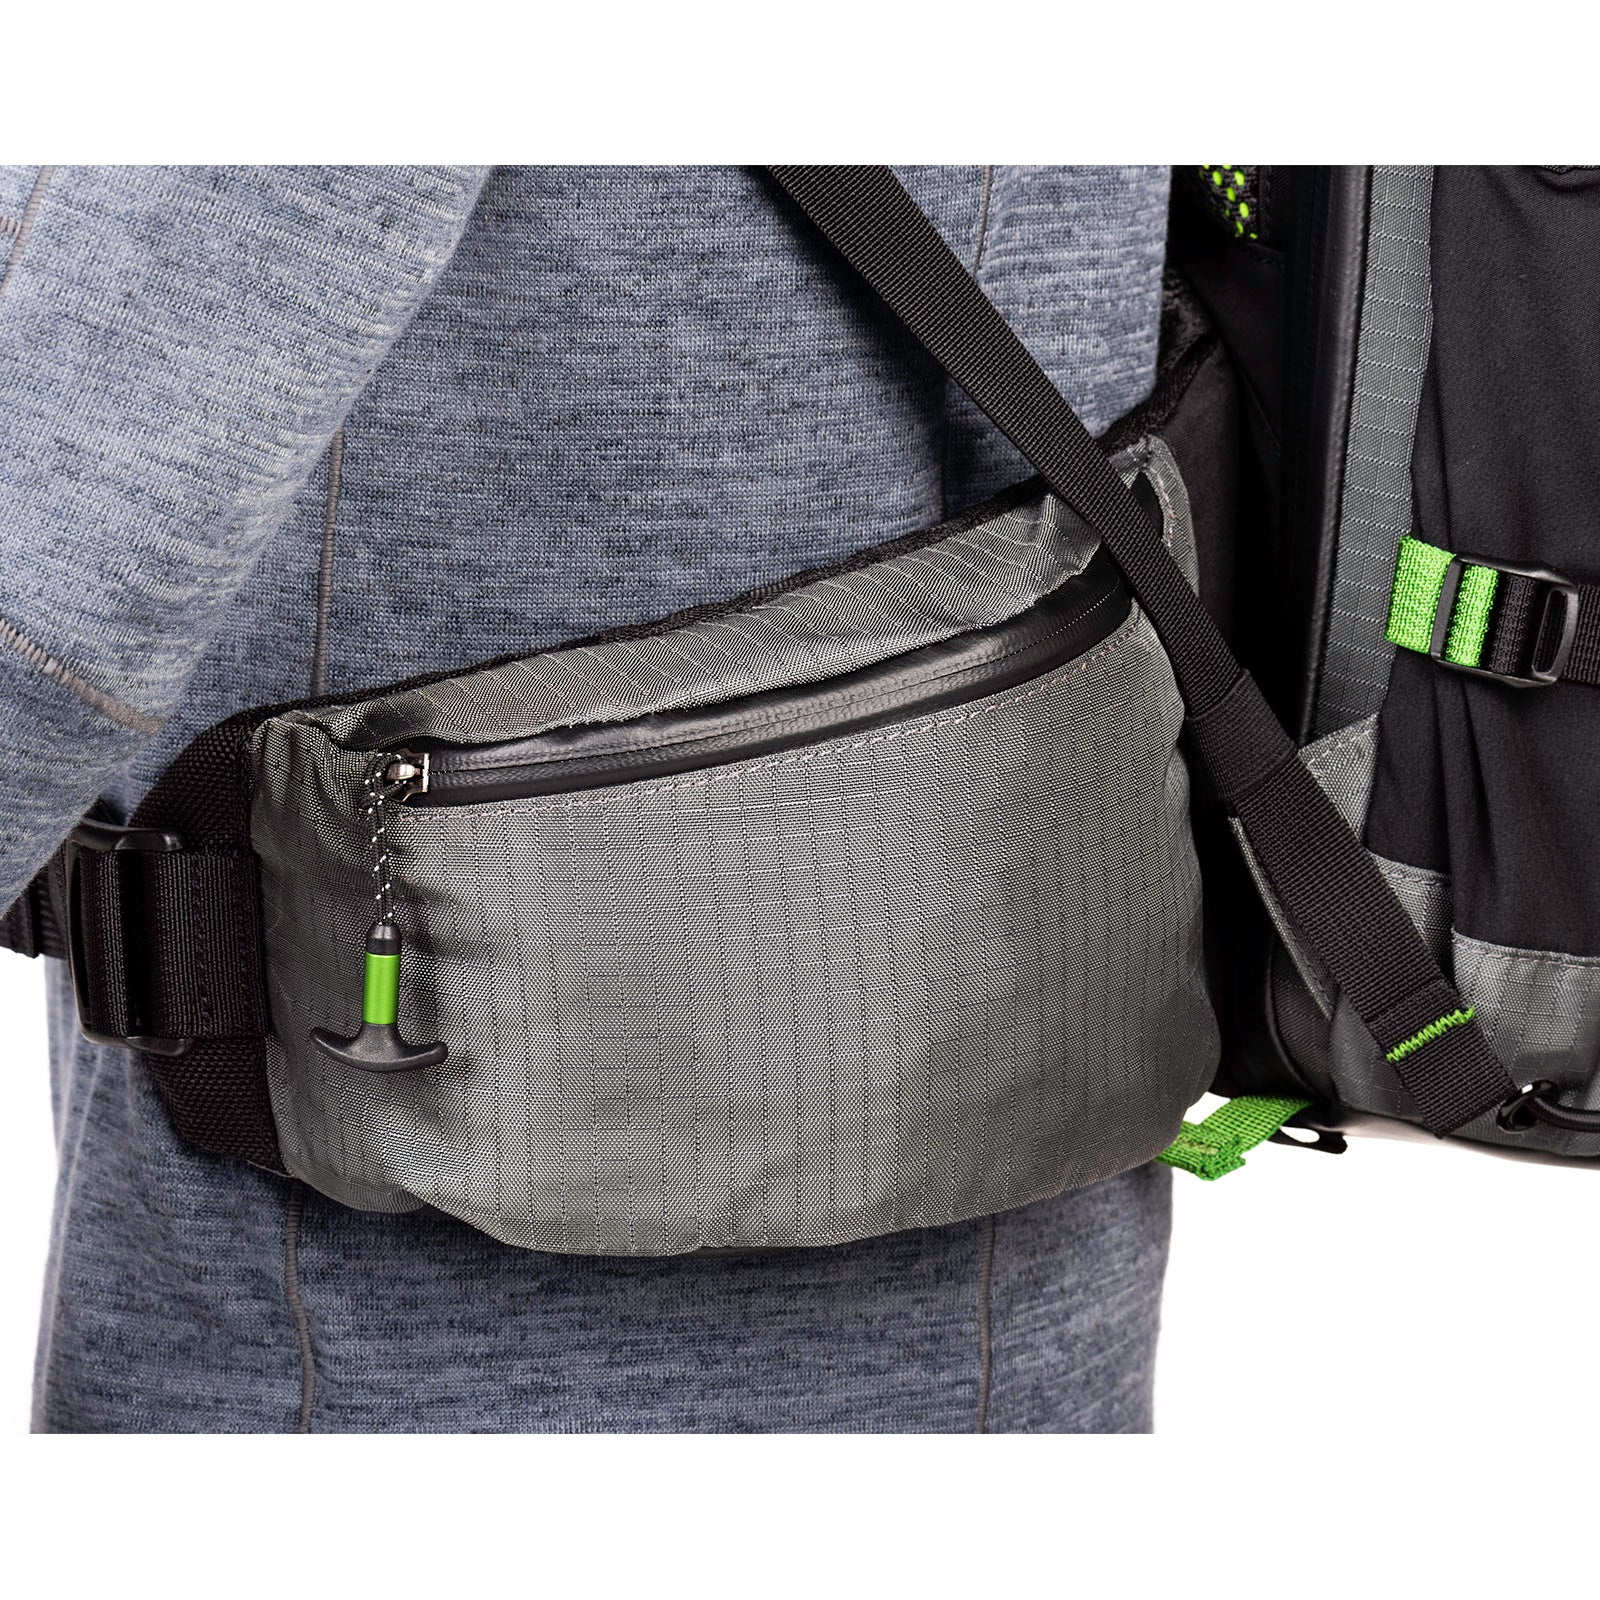 Waist belt pocket for convenient access to small items.